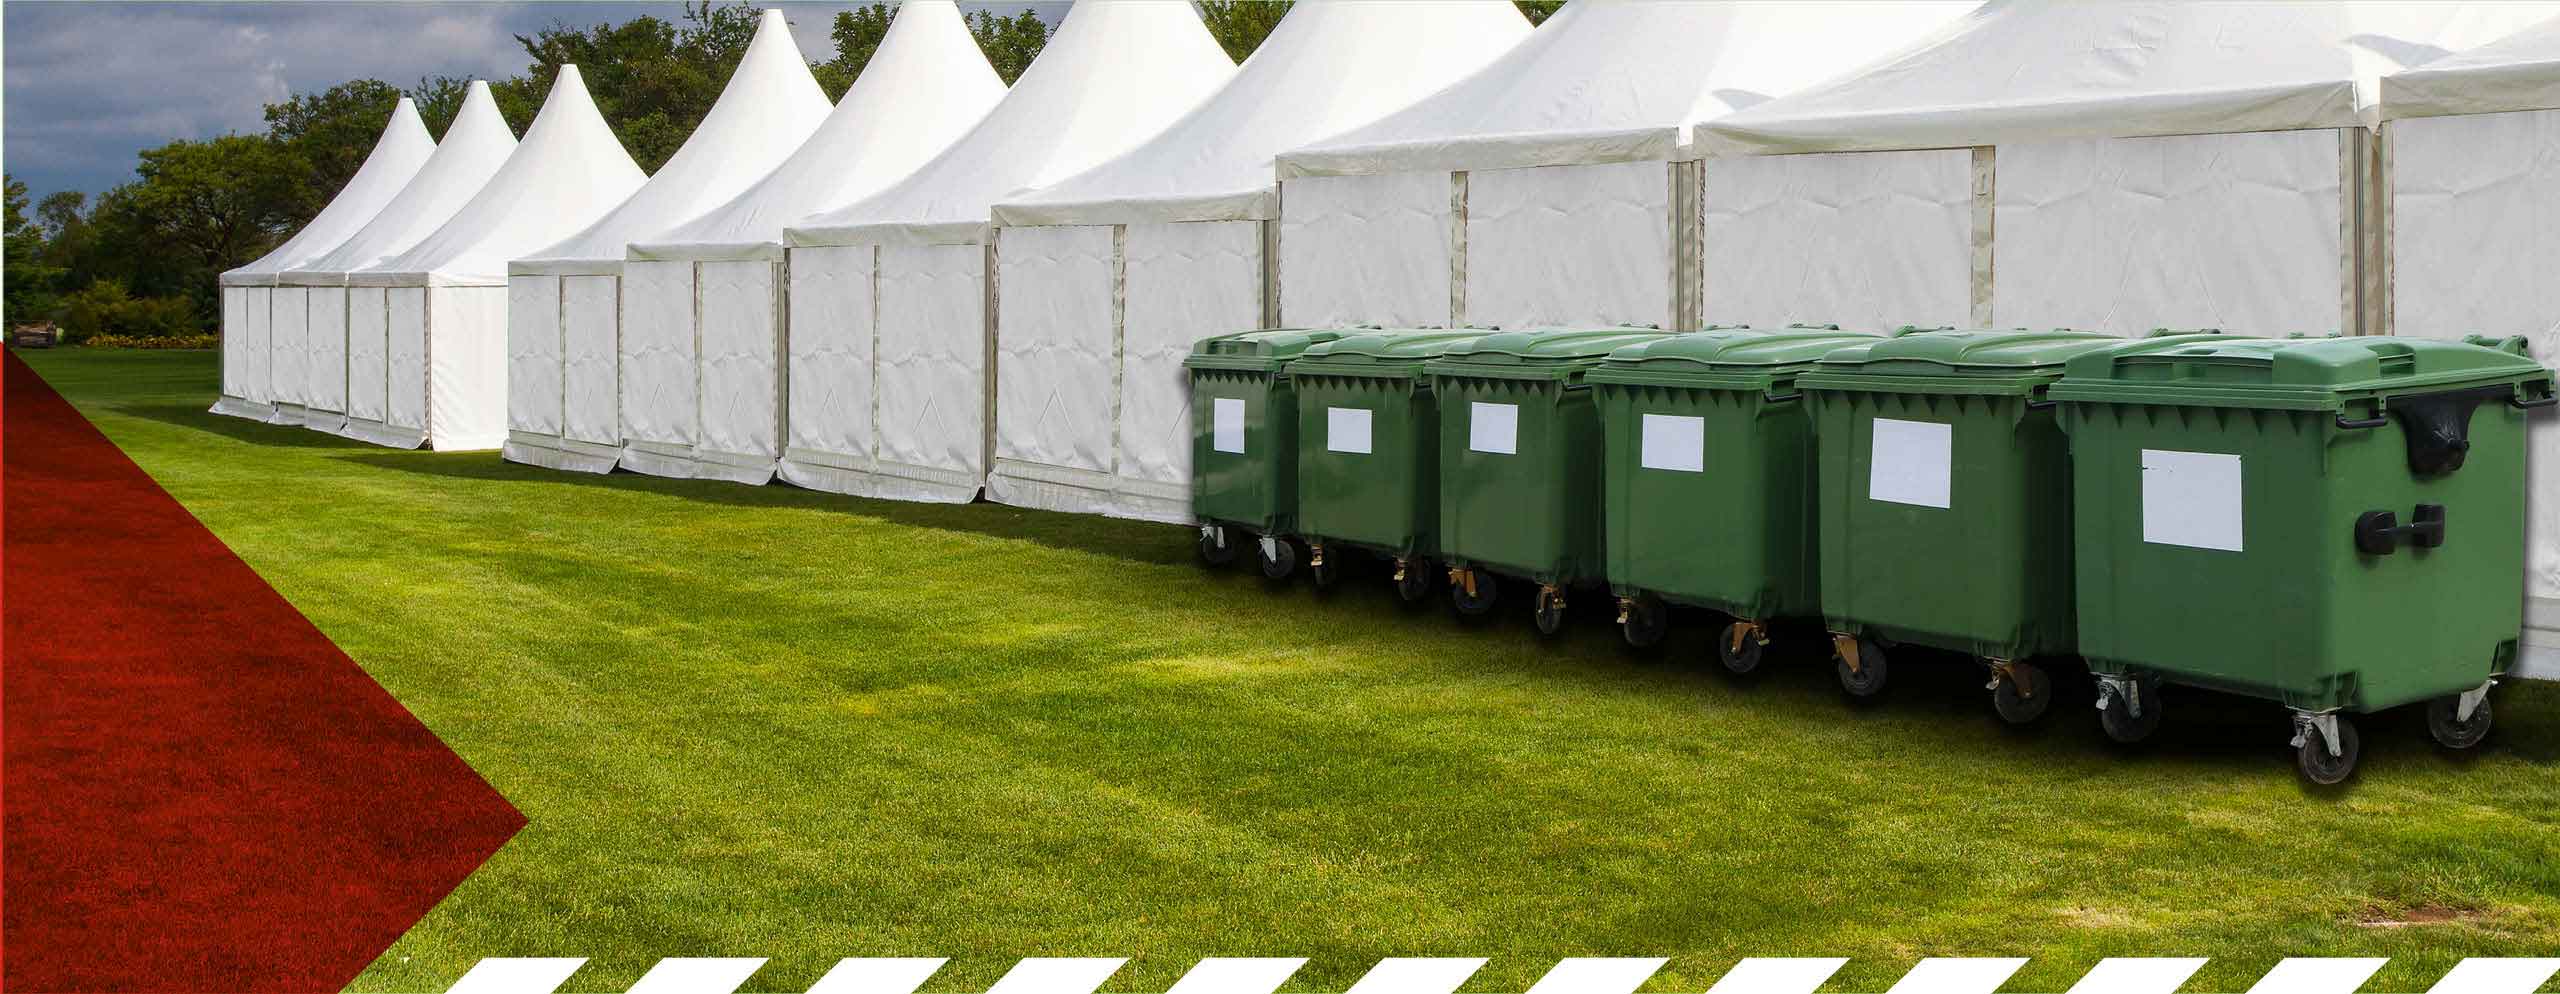 Festival and Event Waste Management